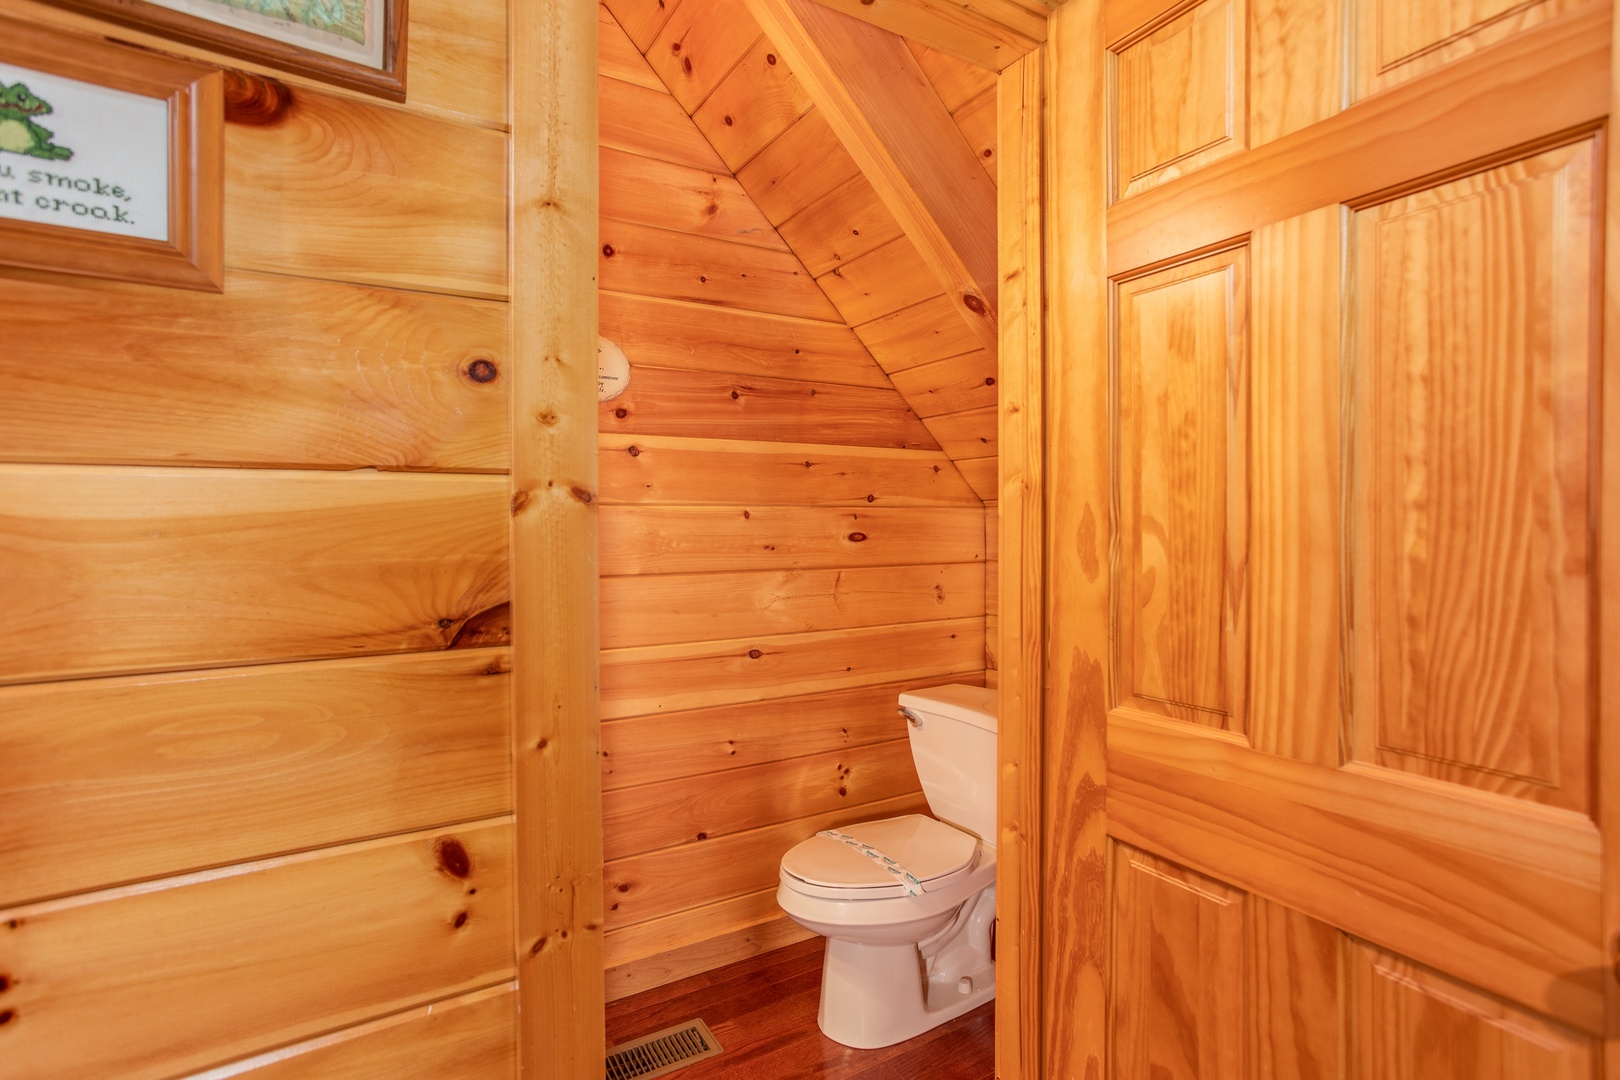 Bathroom in the loft space at Enchanted Evening, a 1-bedroom cabin rental located in Pigeon Forge